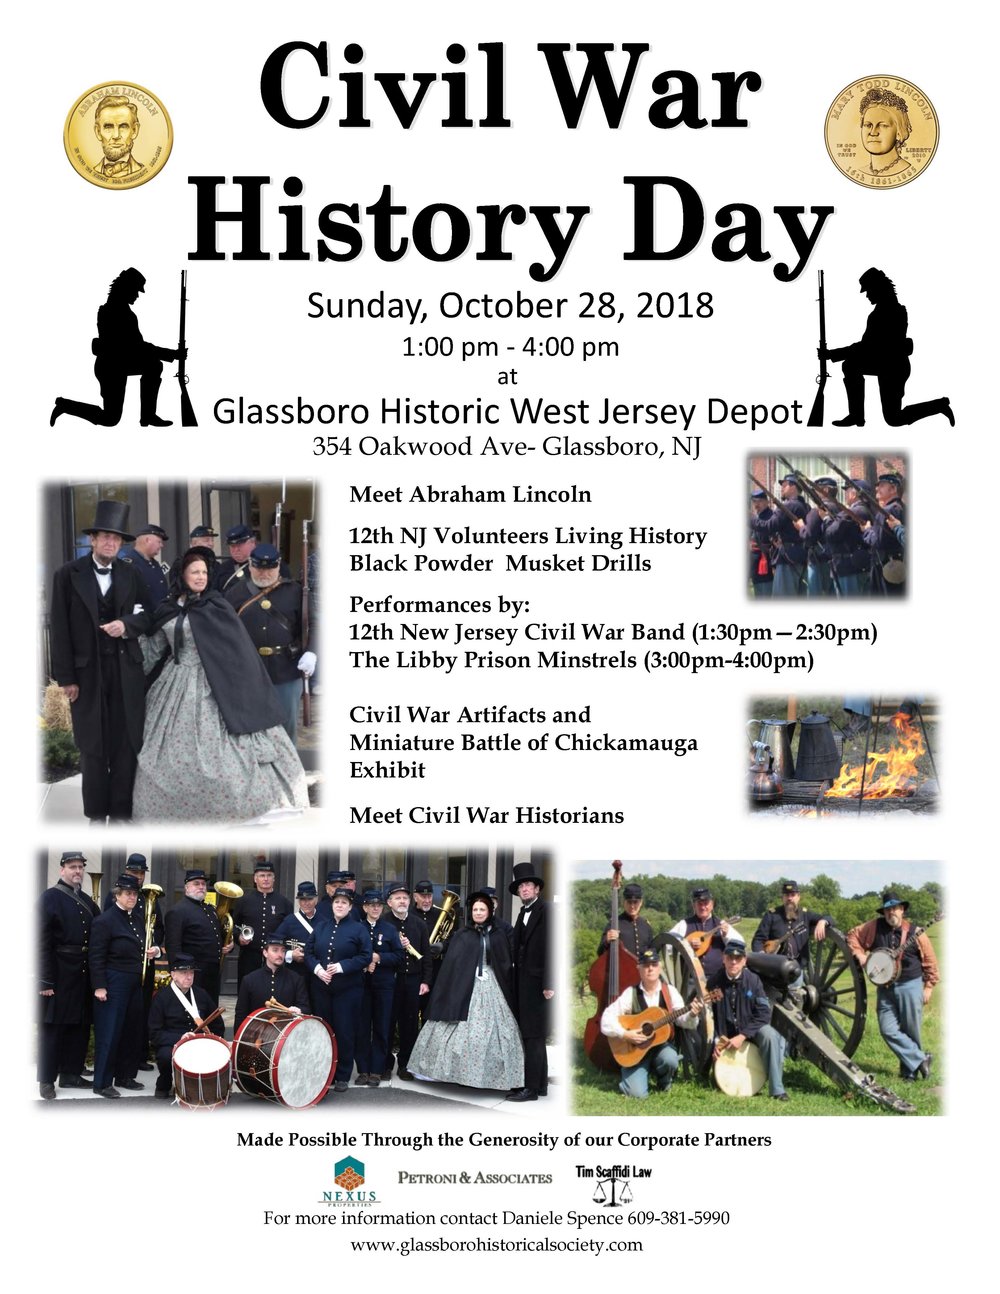 Civil War History Day Official Website Of The Borough Of Glassboroofficial Website Of The Borough Of Glassboro